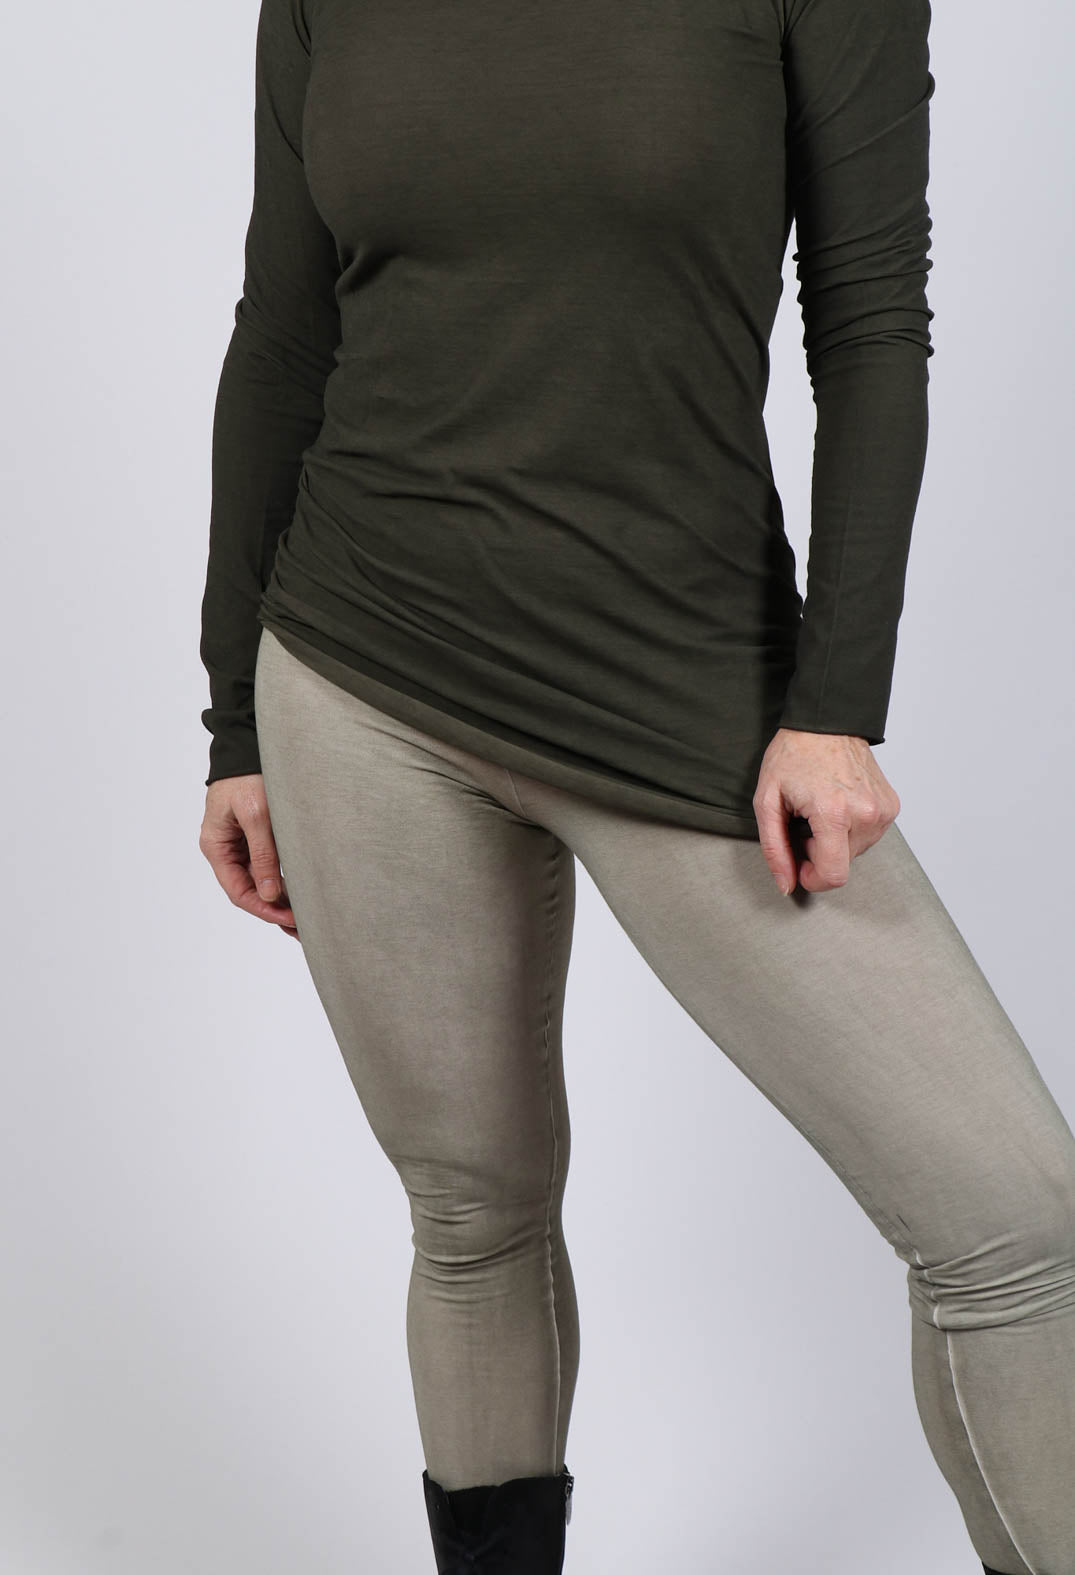 midrise leggings in schilf cloud with a green long sleeve top